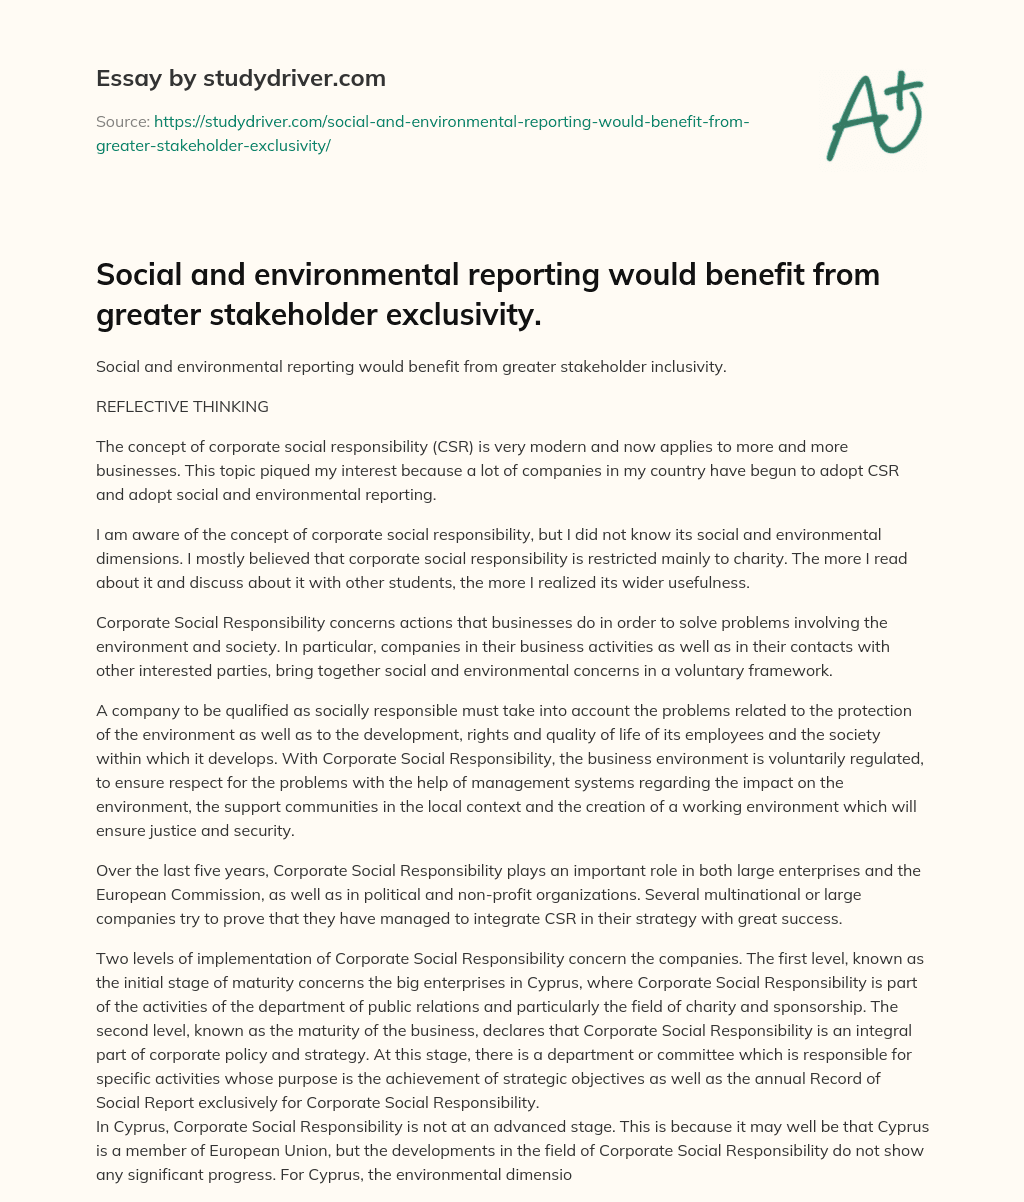 Social and Environmental Reporting would Benefit from Greater Stakeholder Exclusivity. essay